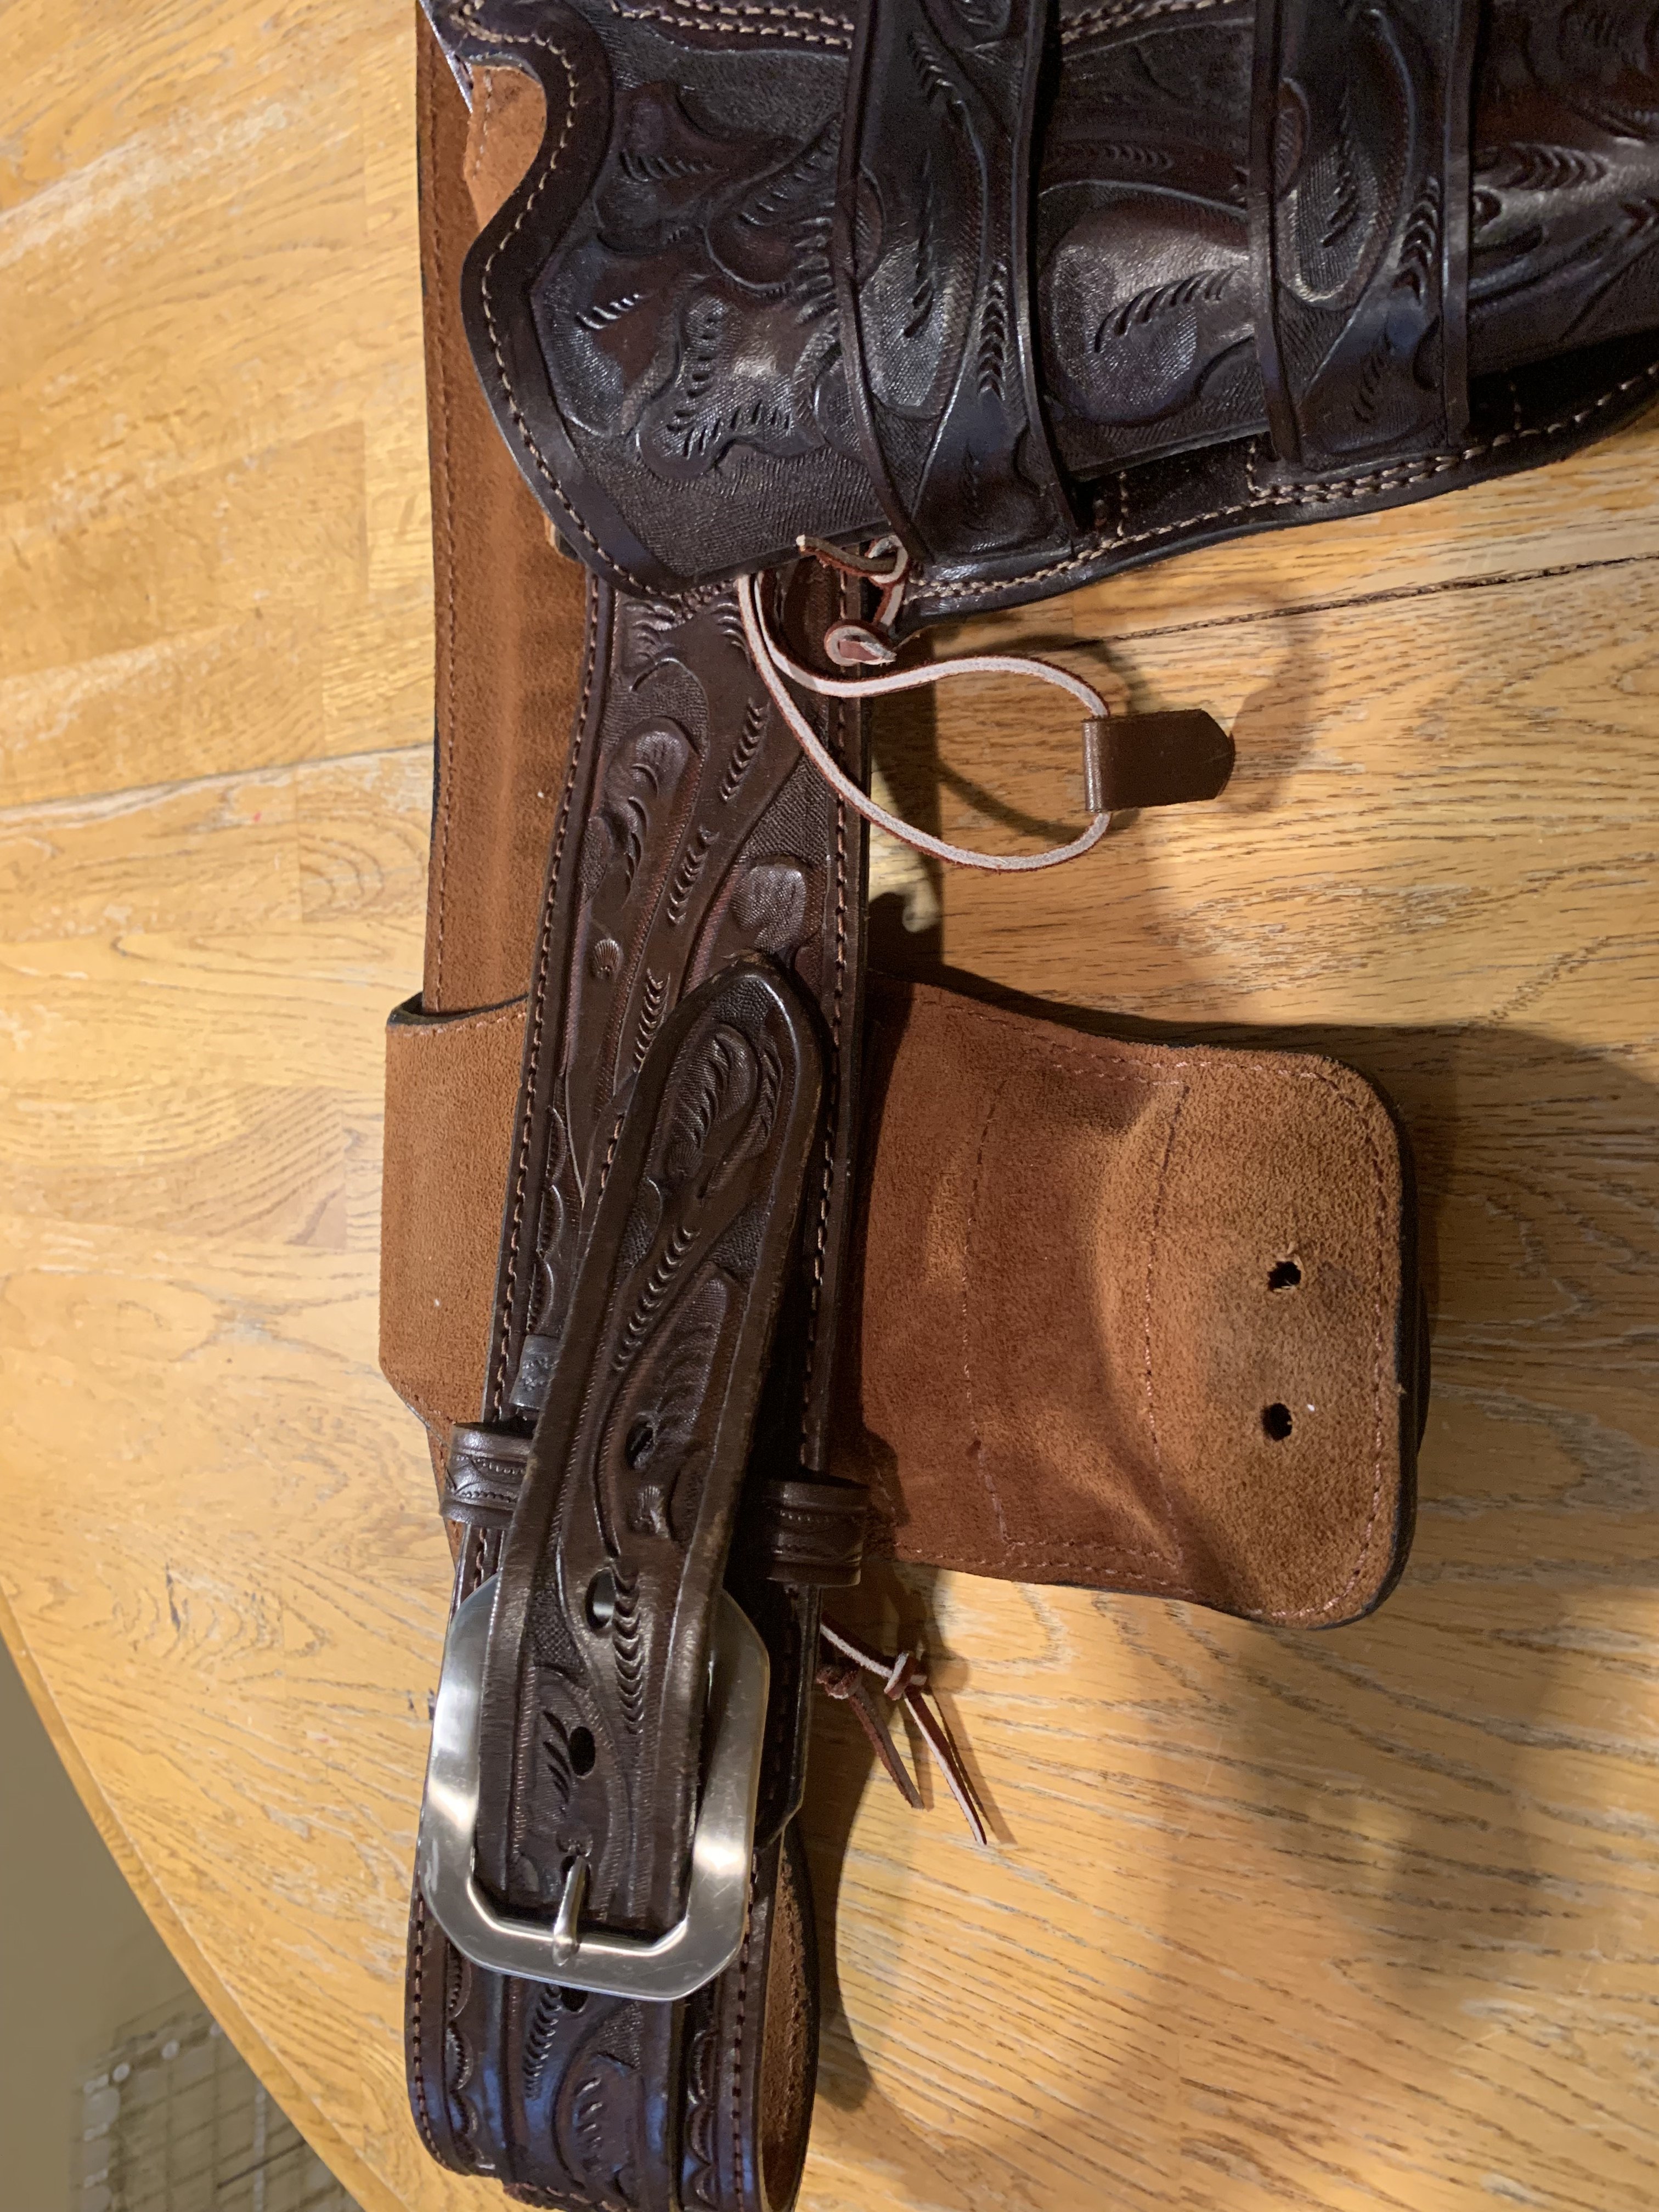 Kirkpatrick hand tooled leather rig for sale. 20% off...now $800 - SASS ...